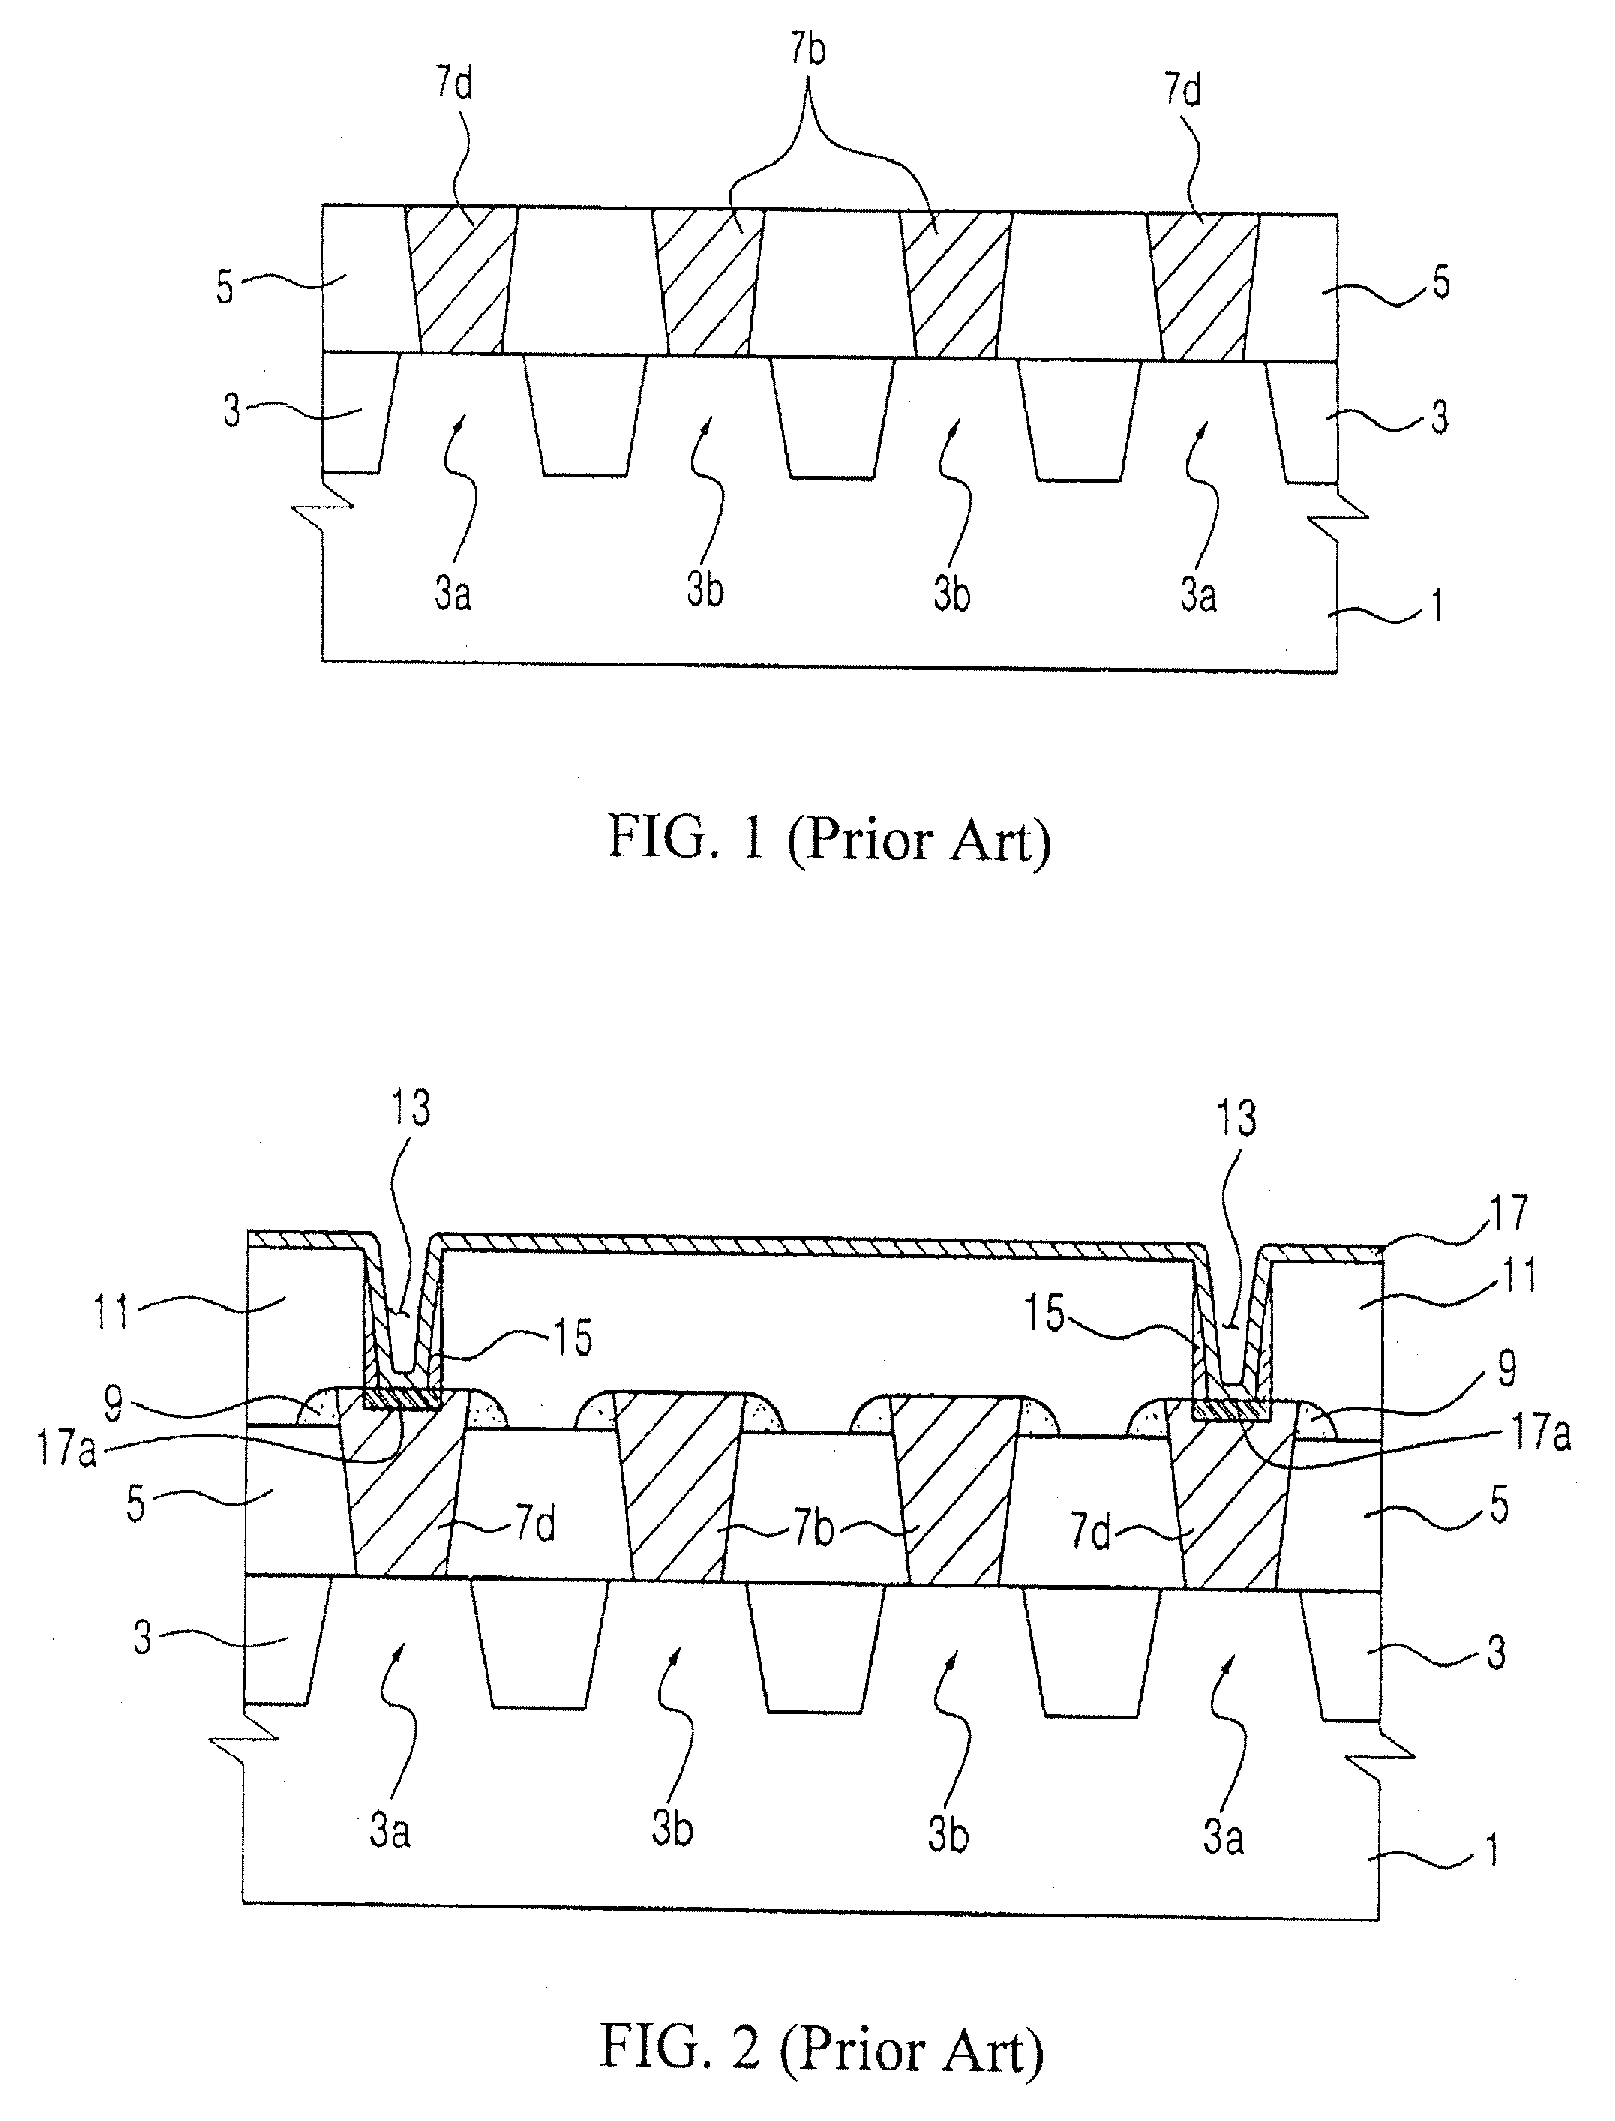 Semiconductor device having a contact structure with a contact spacer and method of fabricating the same